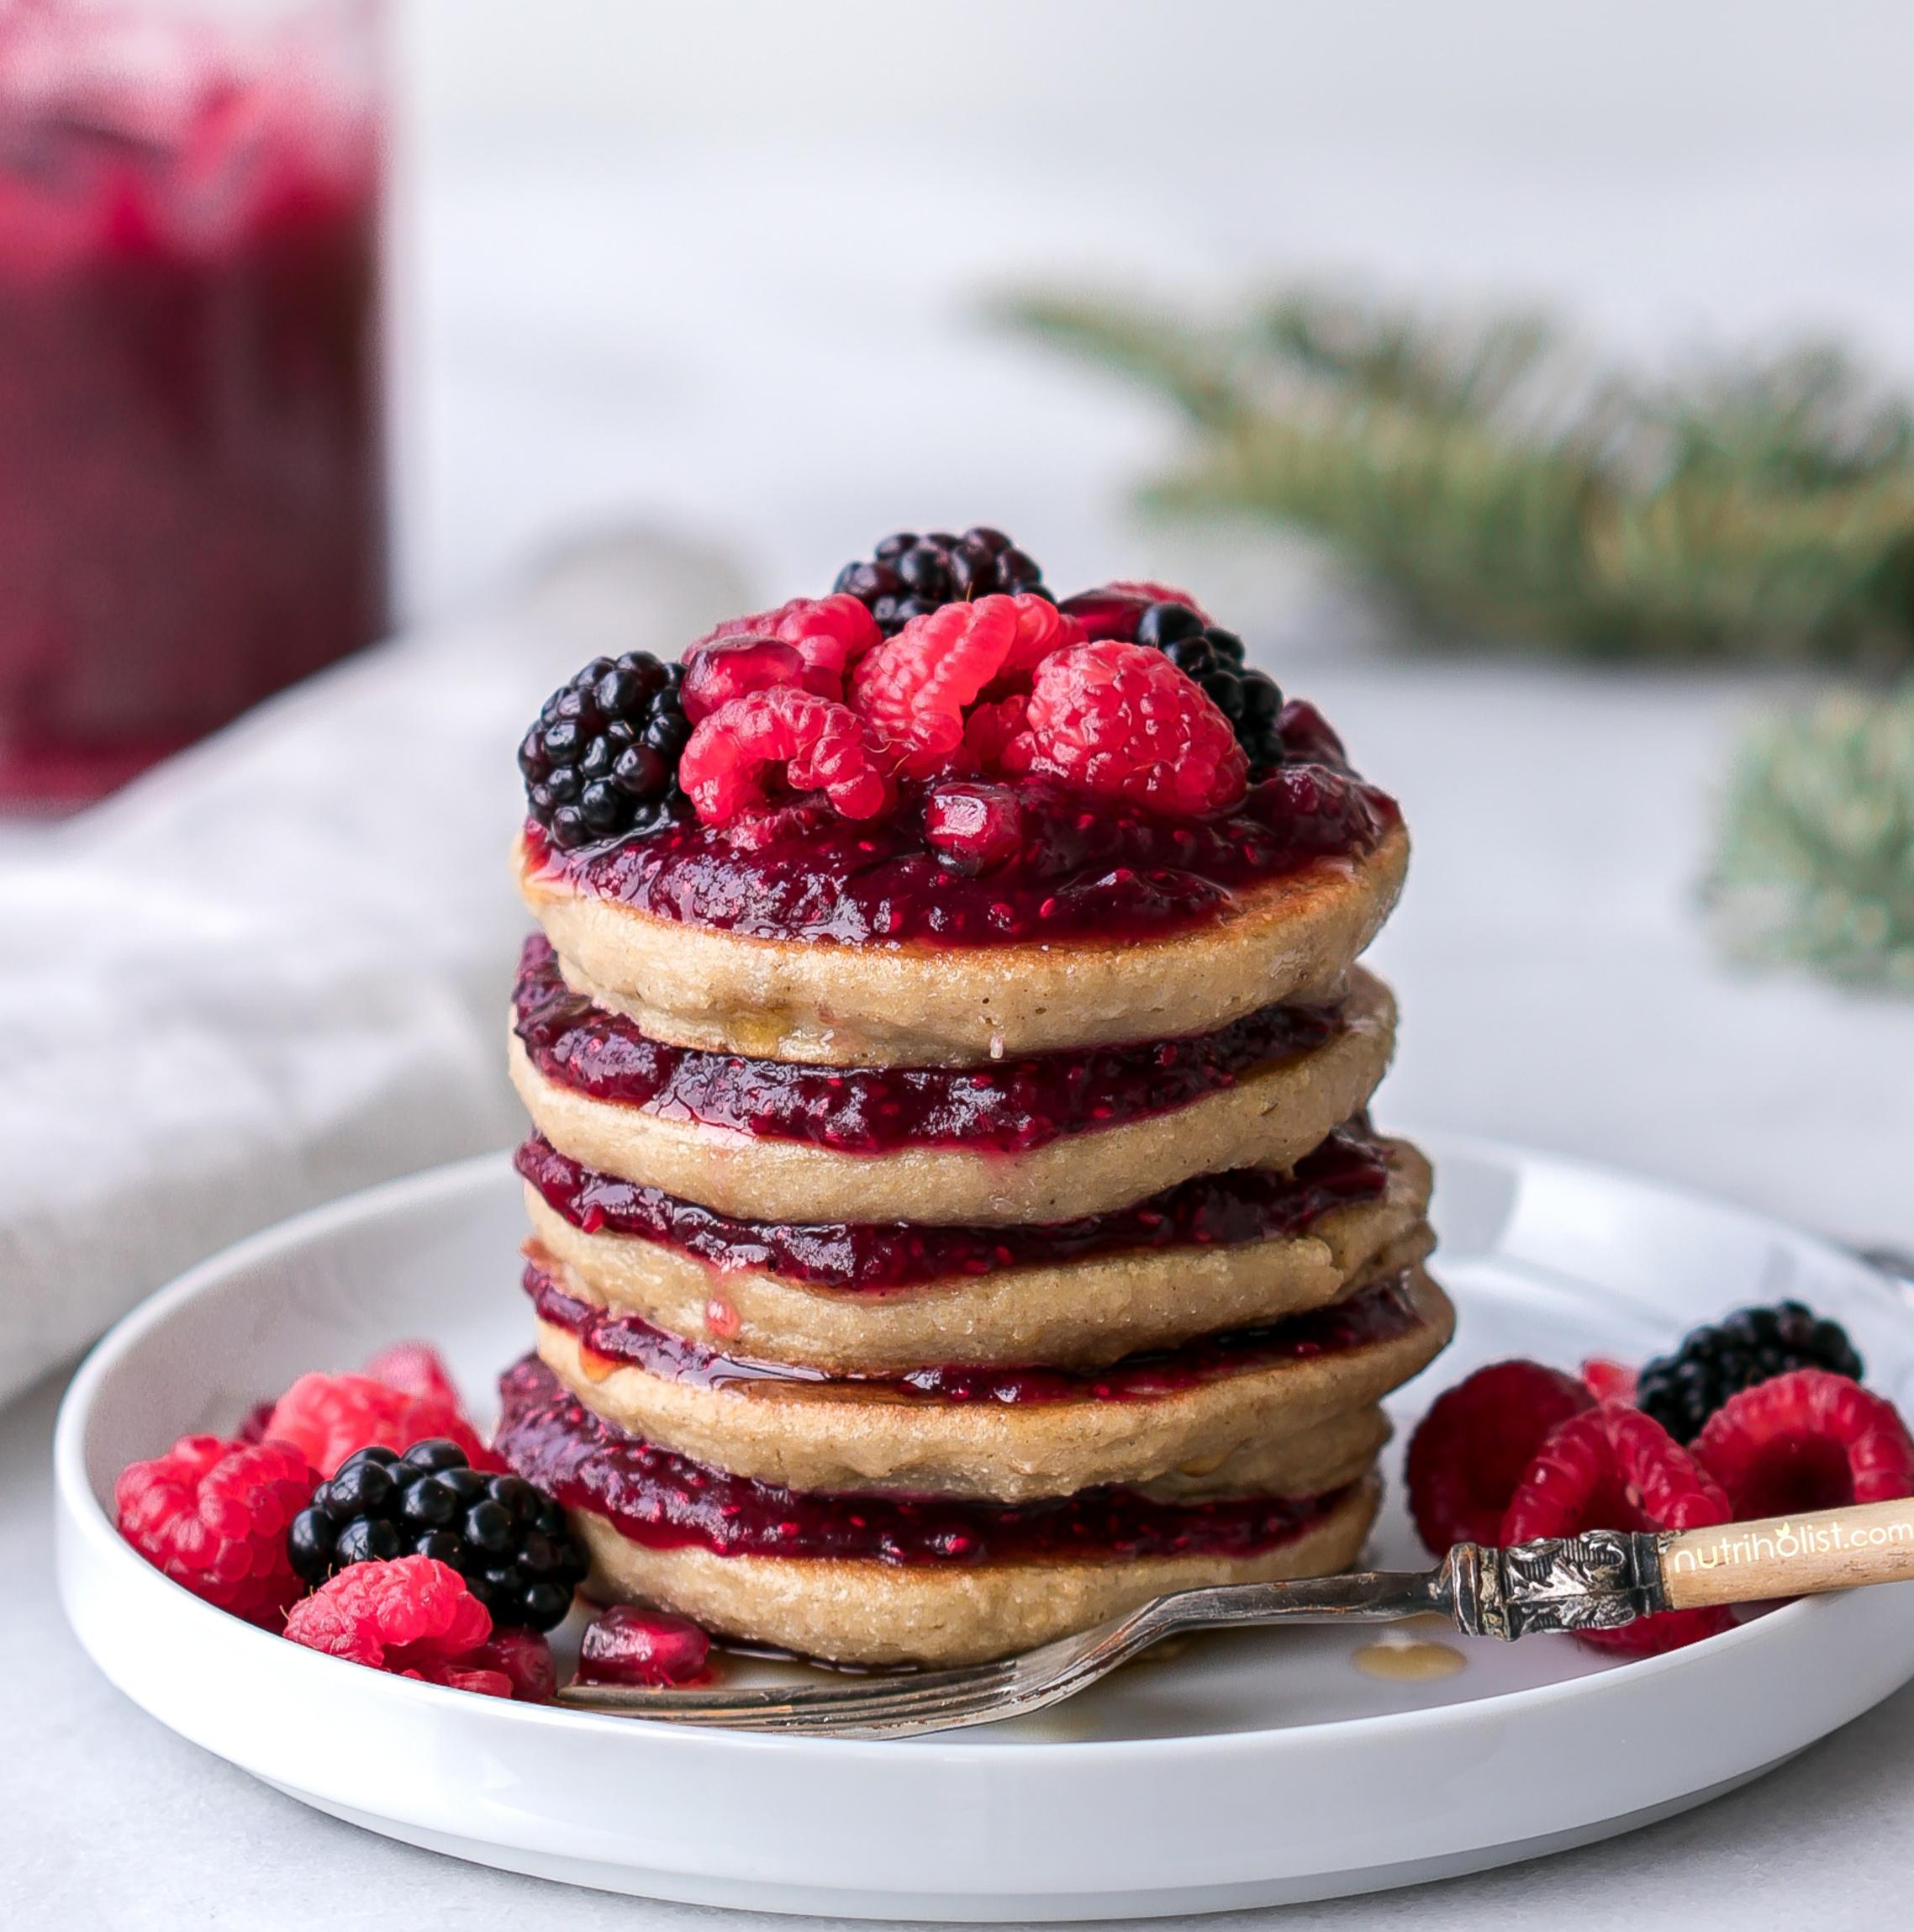  Dig in to these delicious gluten-free quinoa pancakes!